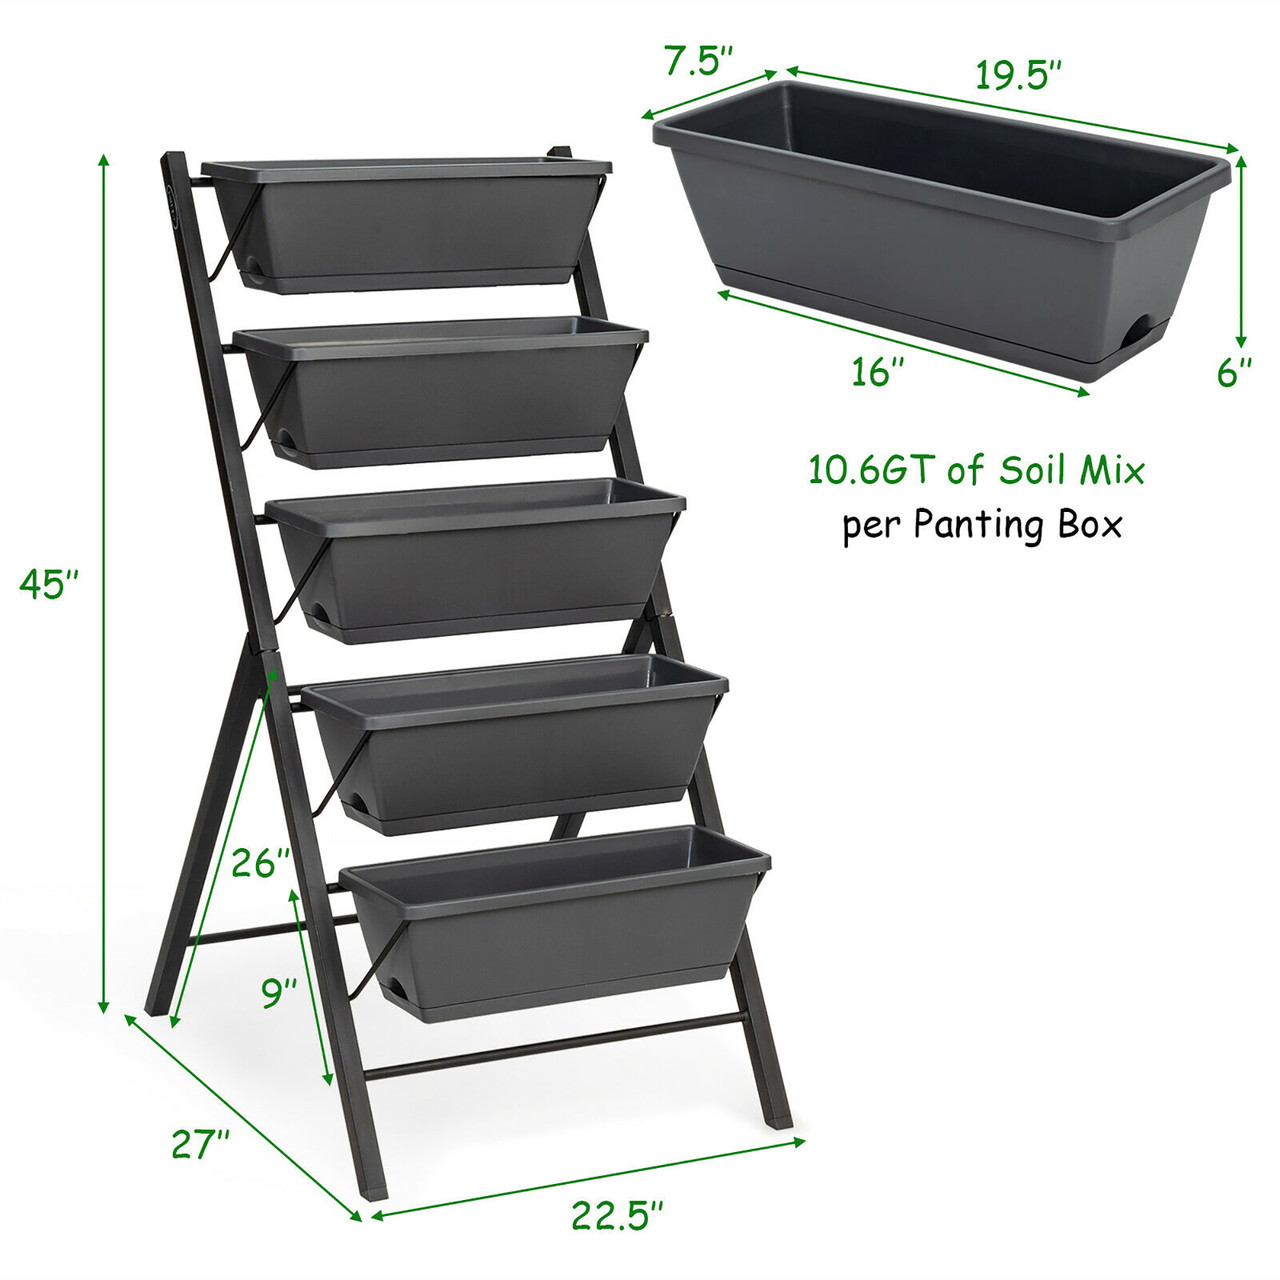 5-Tier Vertical Raised Garden Bed Planter Box product image